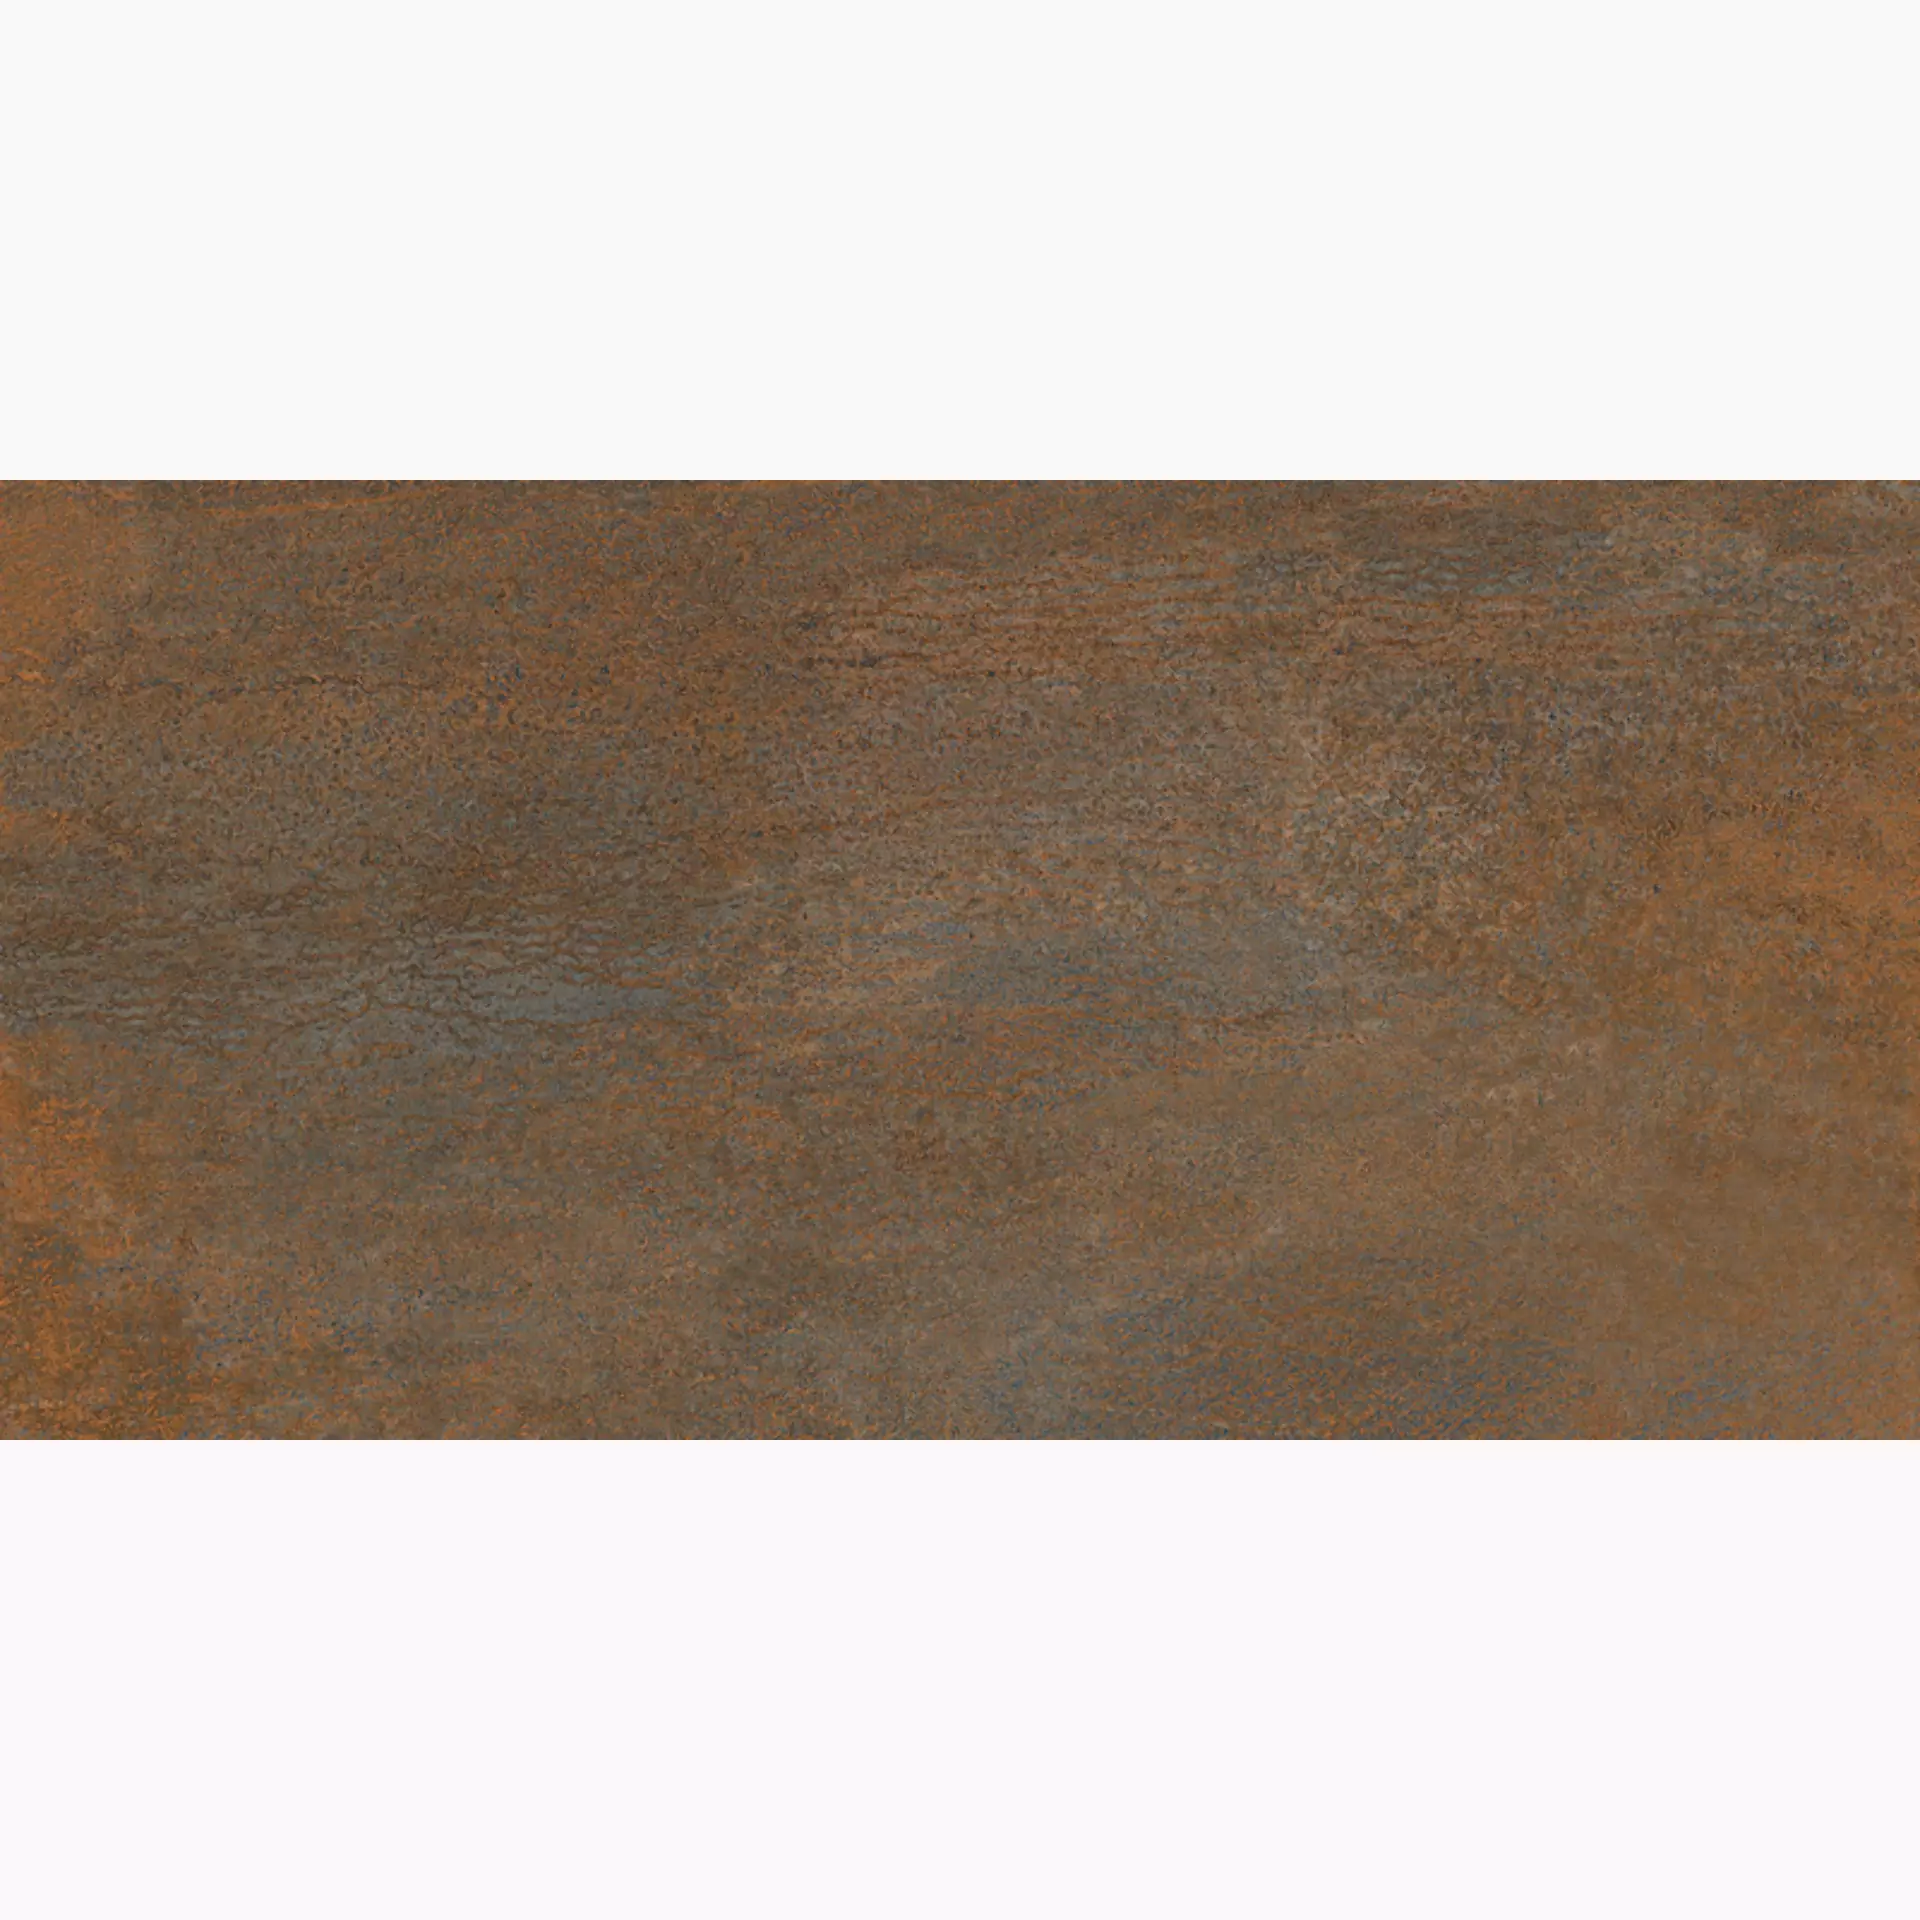 Sant Agostino Oxidart Copper Natural CSAOXCOP12 60x120cm rectified 10mm